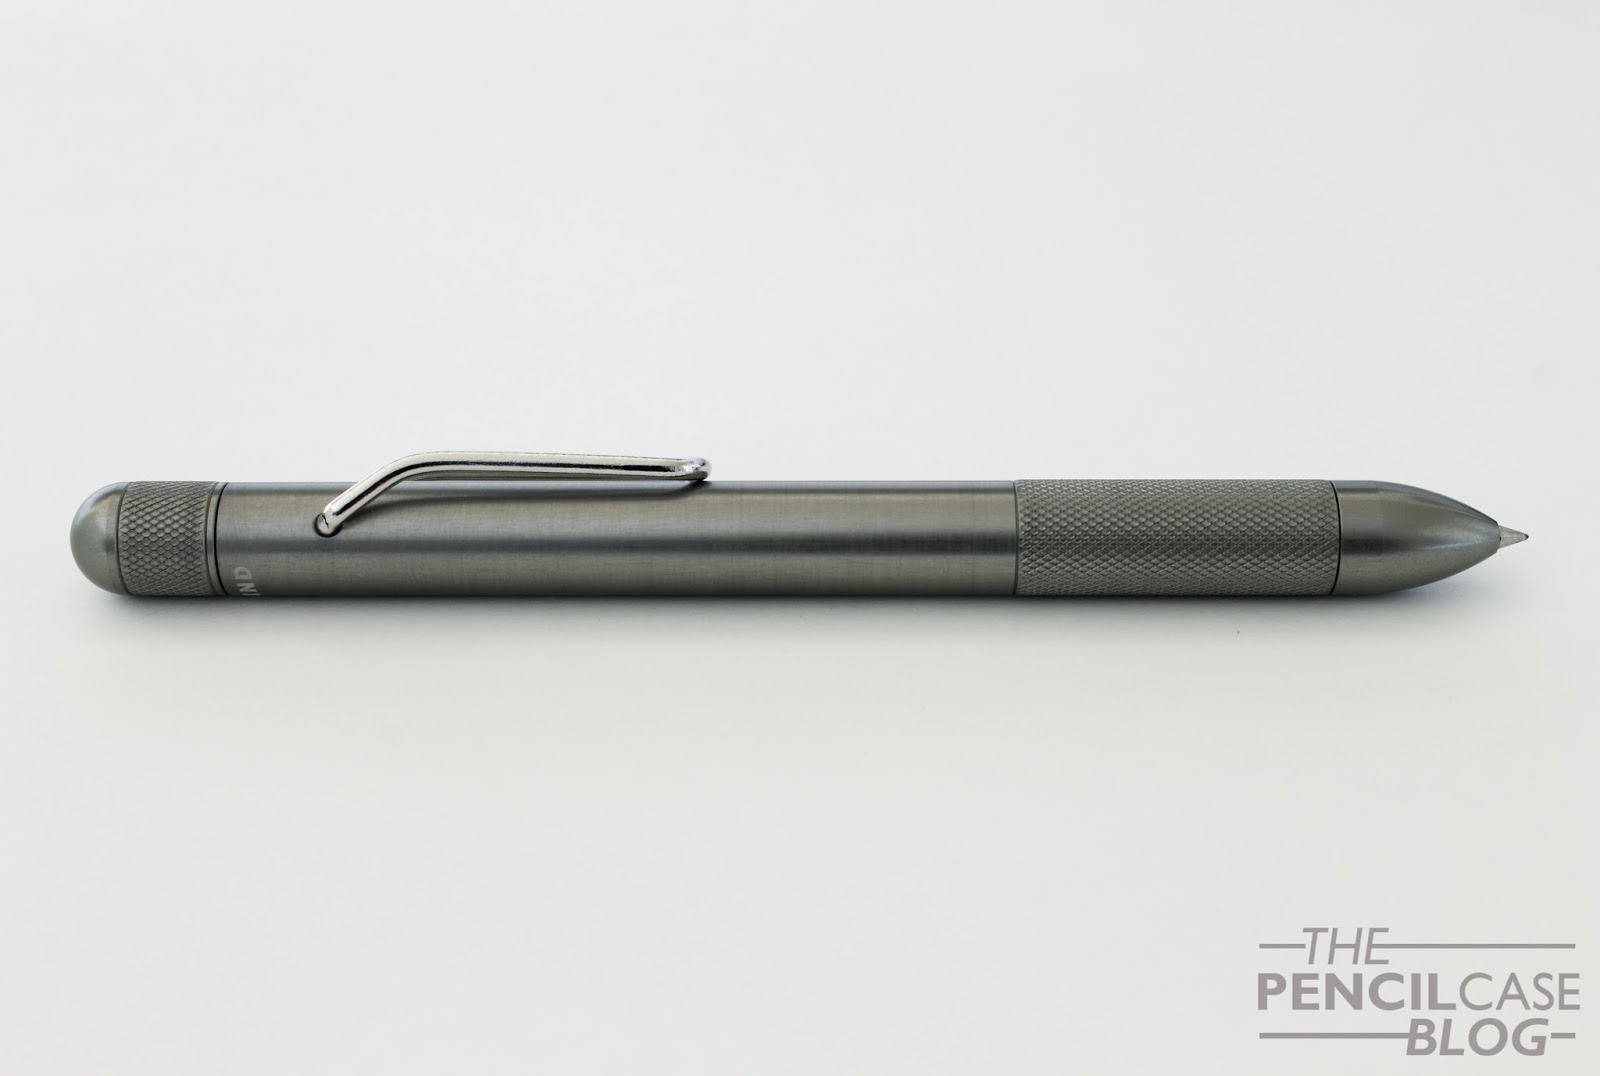 RIIND 'THE PEN' REVIEW, The Pencilcase Blog